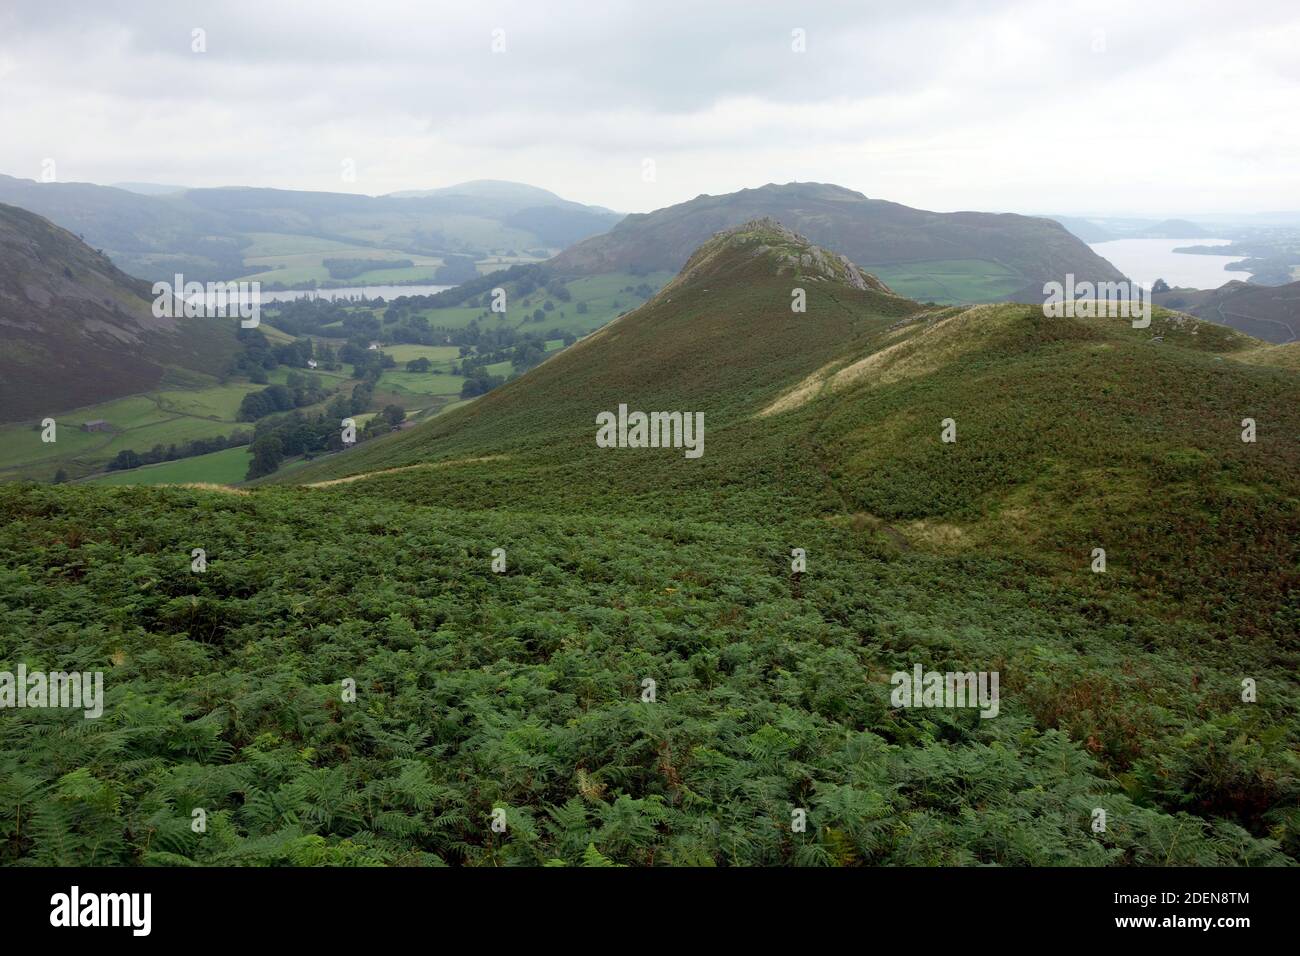 Looking over Winter Crag to the Wainwright 'Hallin Hill' from the Summit Ridge of 'Beda Fell' in the Lake District National Park, Cumbria, England,UK. Stock Photo